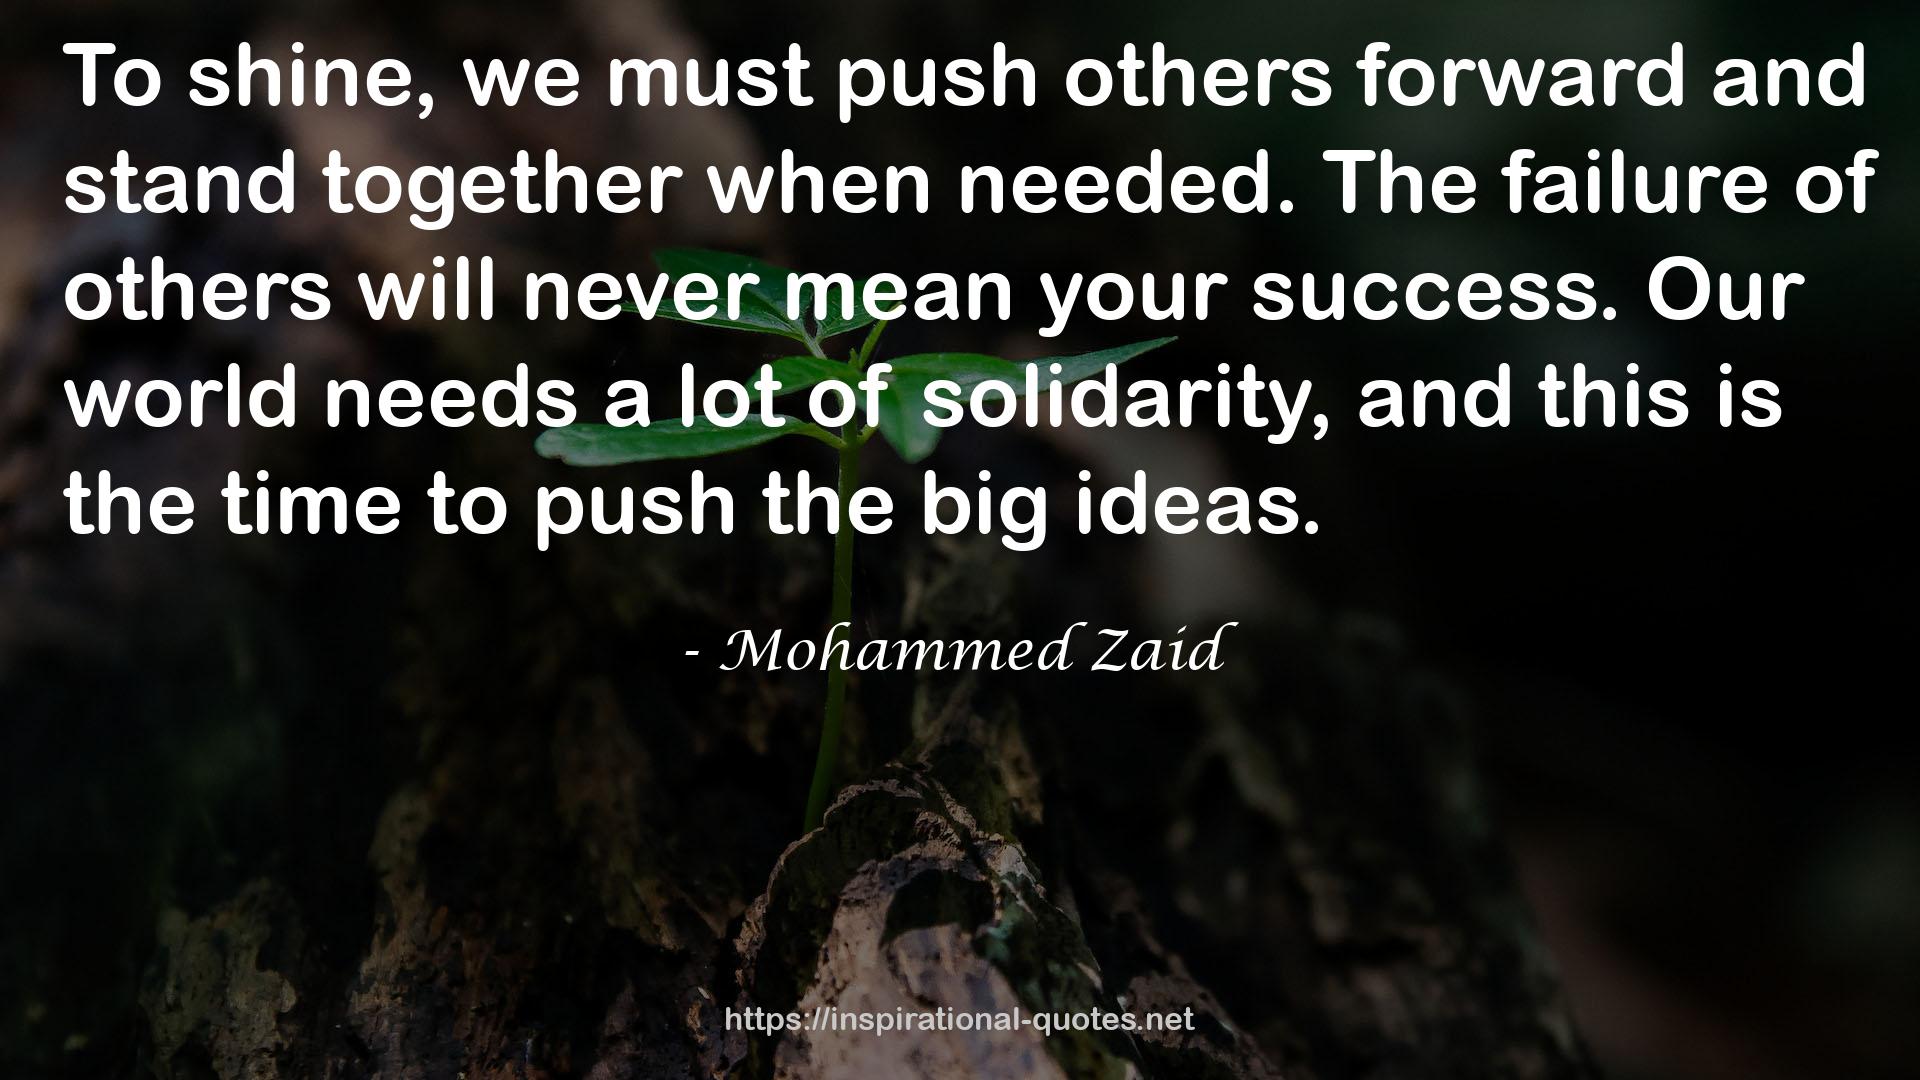 Mohammed Zaid QUOTES